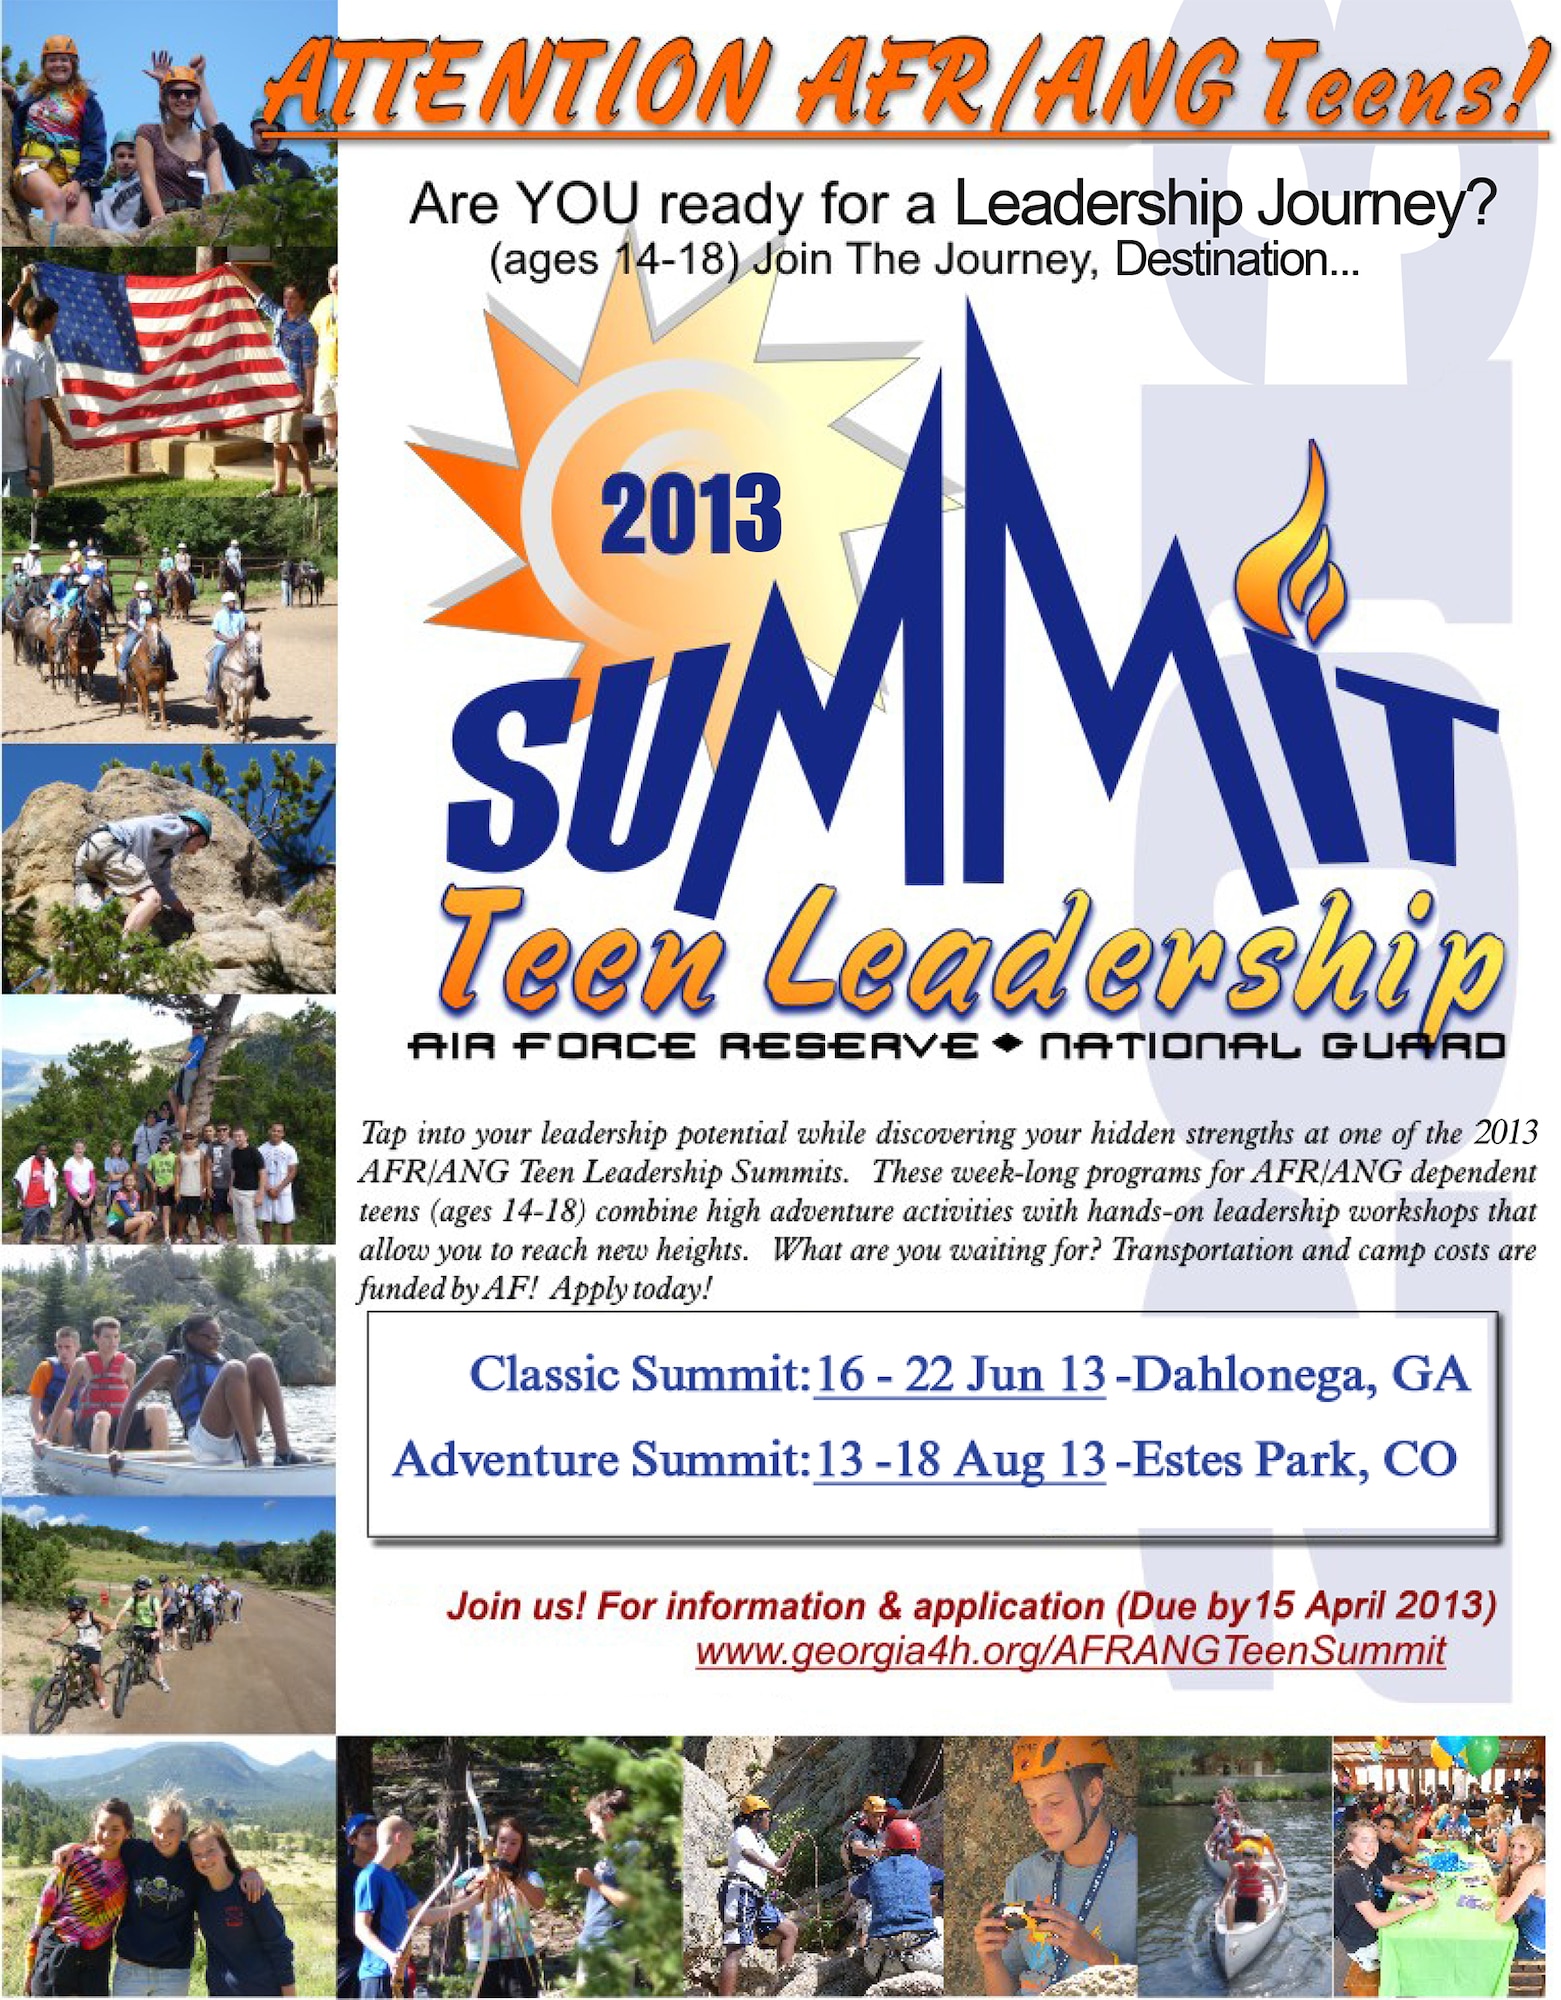 April 15 is the deadline to sign up for the 2013 AFR/ANG Teen Leadership Summits. The week-long camps for 14-18 year old dependent teens of current Air Force Reserve or Air National Guard members will be held June 16-21 in Dahlonega, Ga., and Aug. 13-18, at Estes Park, Colo. For more information, visit the Georgia 4-H program website at http://www.georgia4h.org/afrangteensummit. (U.S. Air Force graphic)